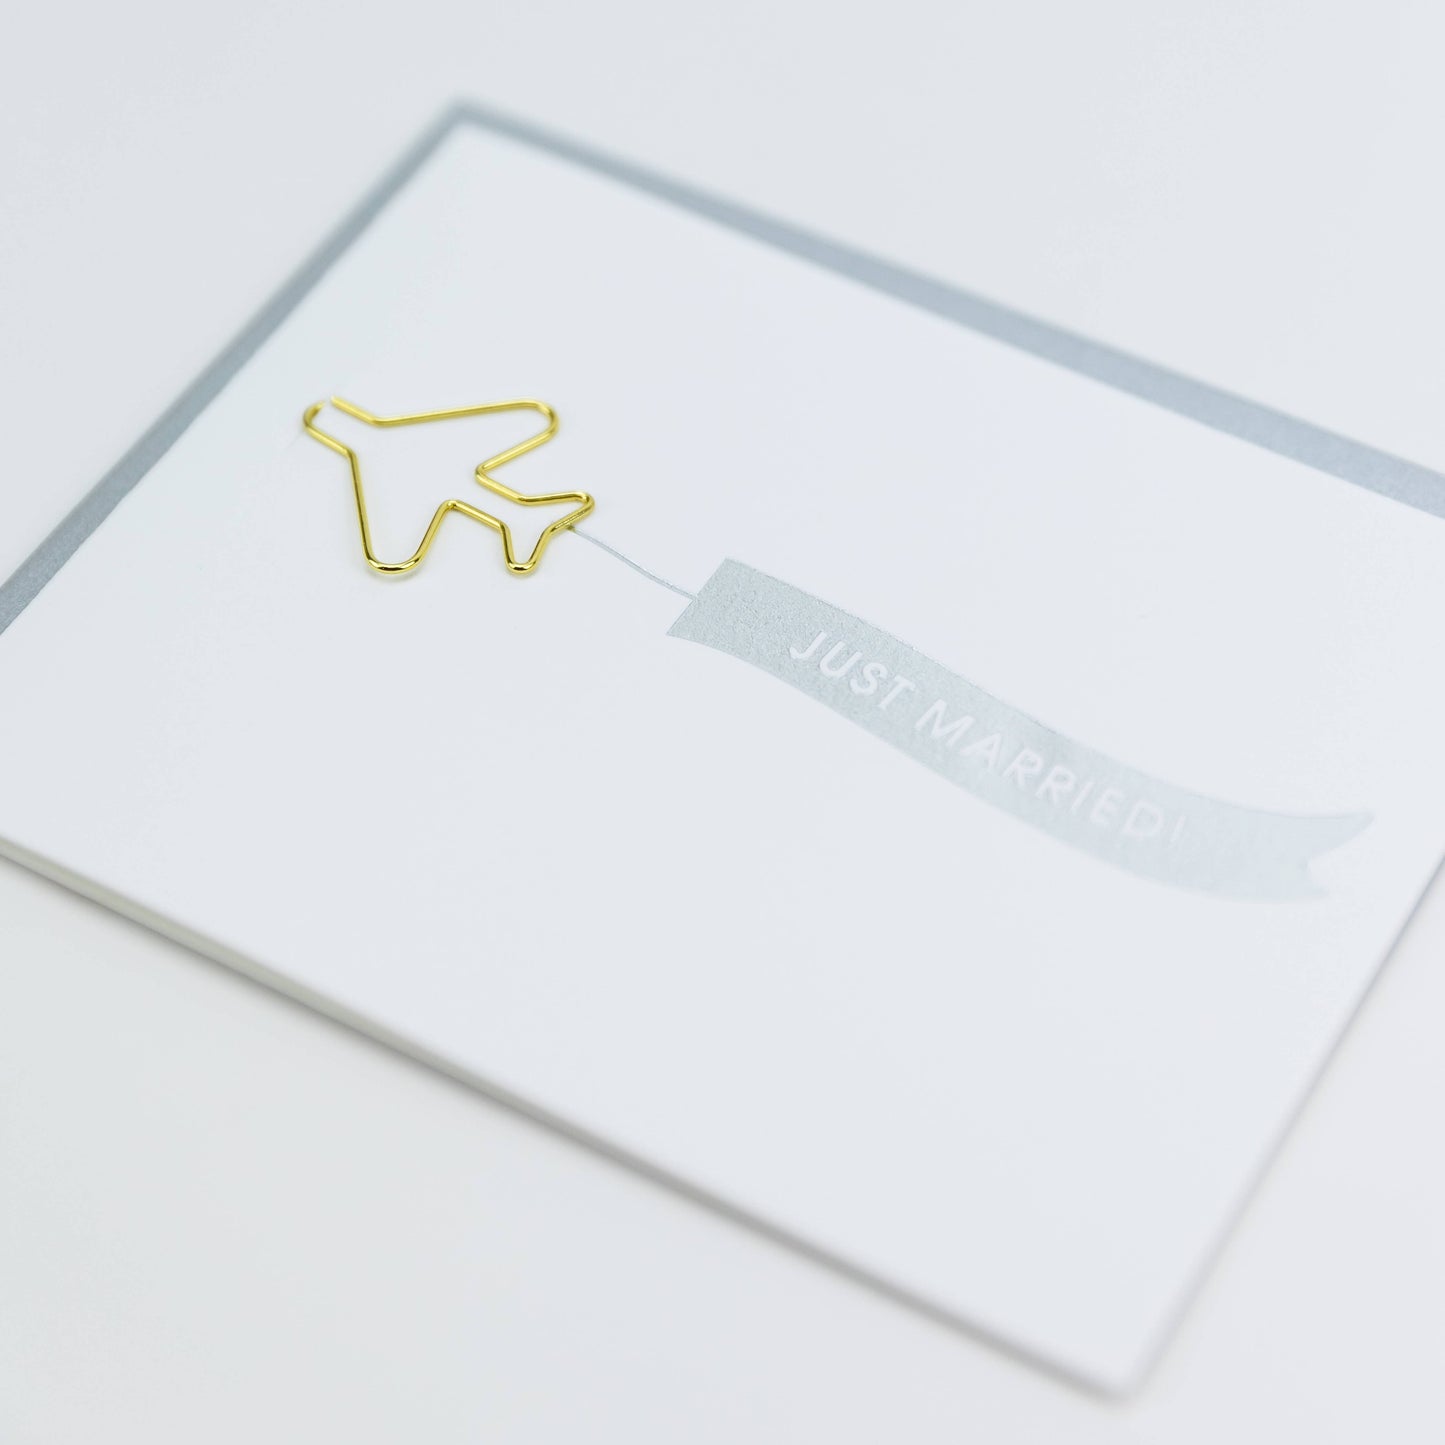 Banner: Just Married Paper Clip Letterpress Greeting Card